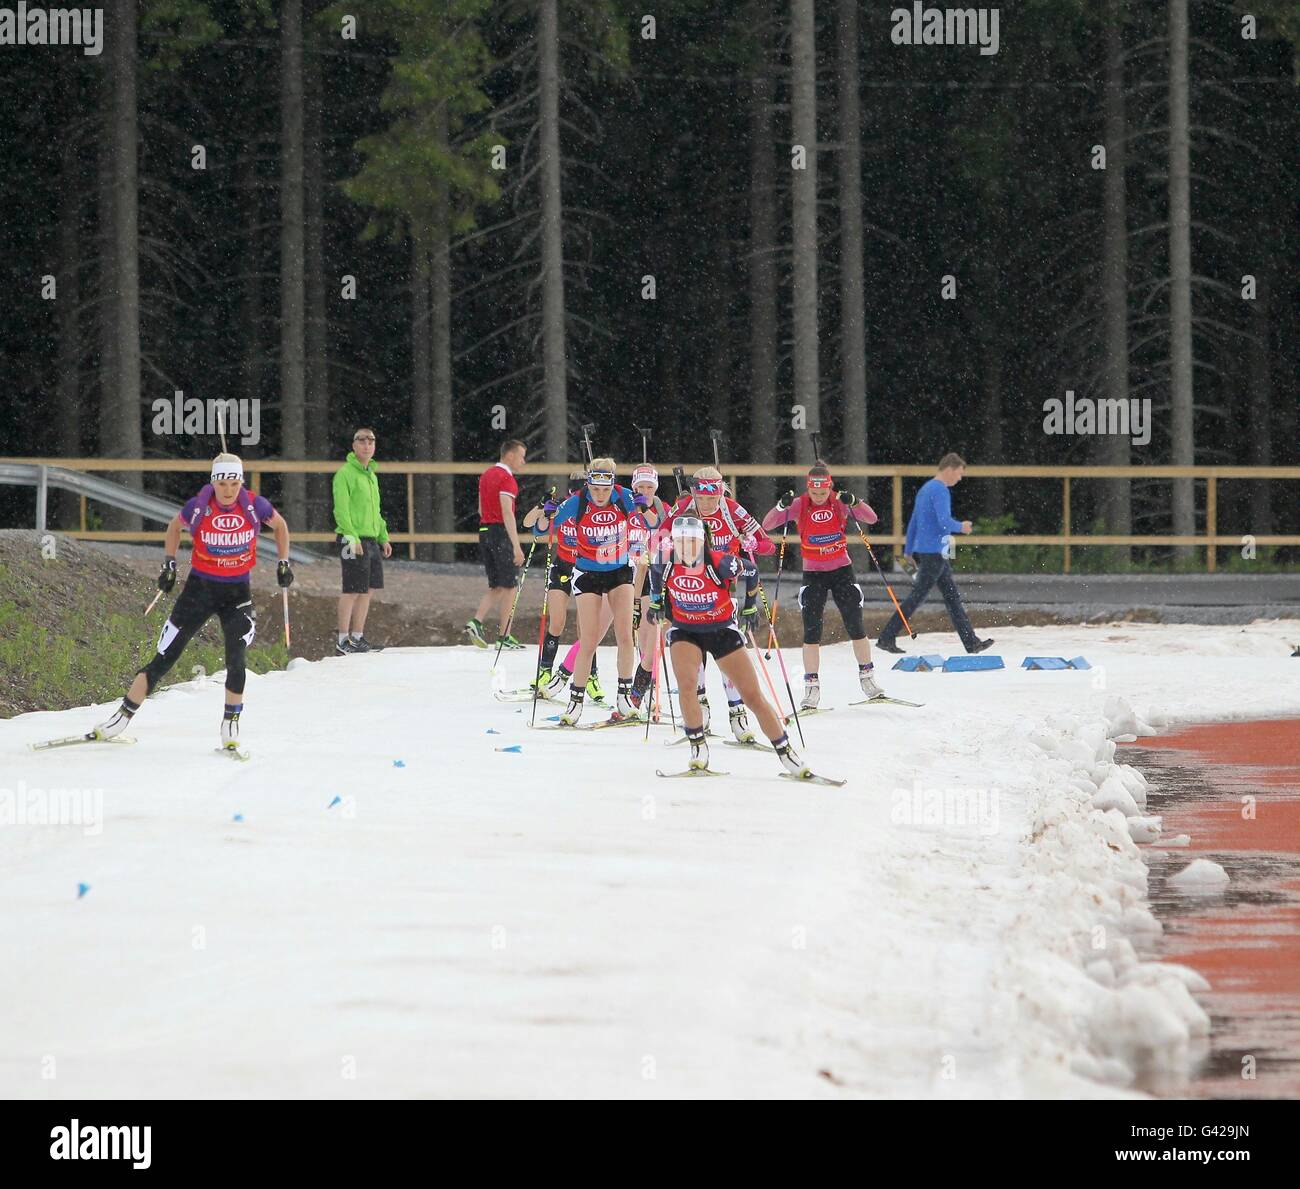 Imatra, Finland. 17th June, 2016. Skiers compete during a biathlon event in Imatra, Finland, on June 17, 2016. The some 500 meters long skiing track was made of last winter's natural snow. Eight skiers from Finland, Russia and Italy took part in the competition. © Li Jizhi/Xinhua/Alamy Live News Stock Photo